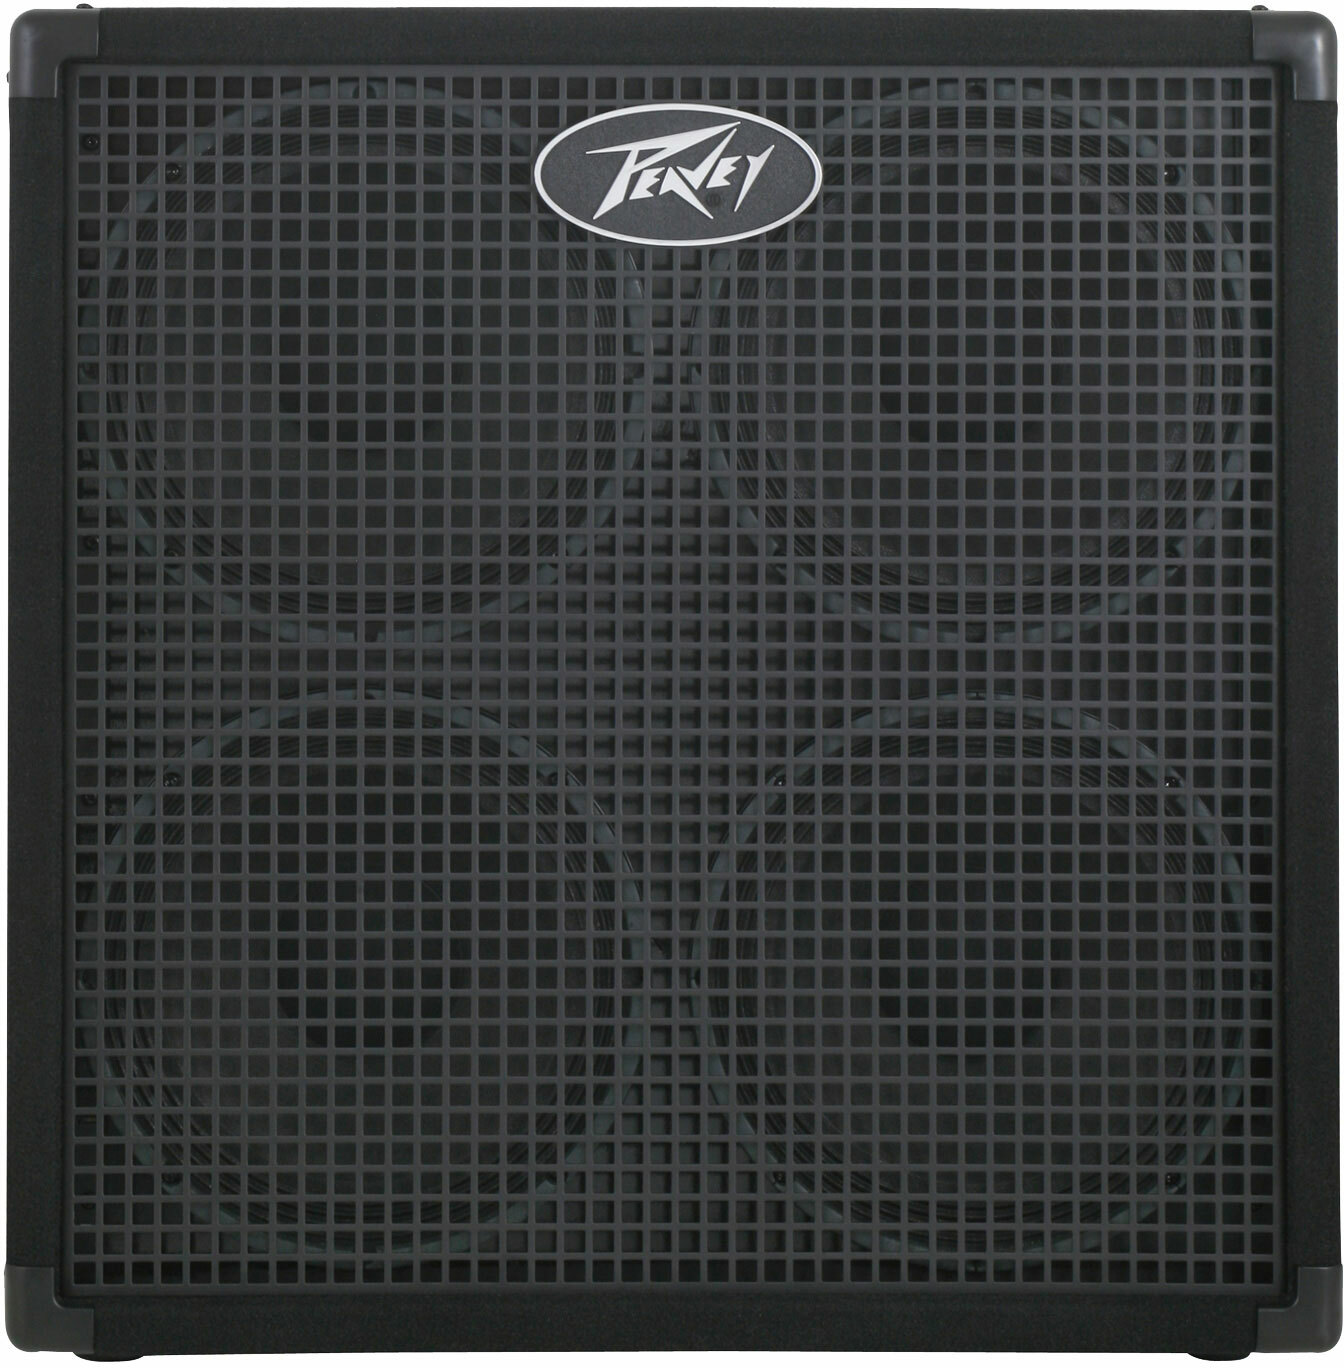 Peavey Headliner 410 800w 8-ohms - Bass amp cabinet - Main picture